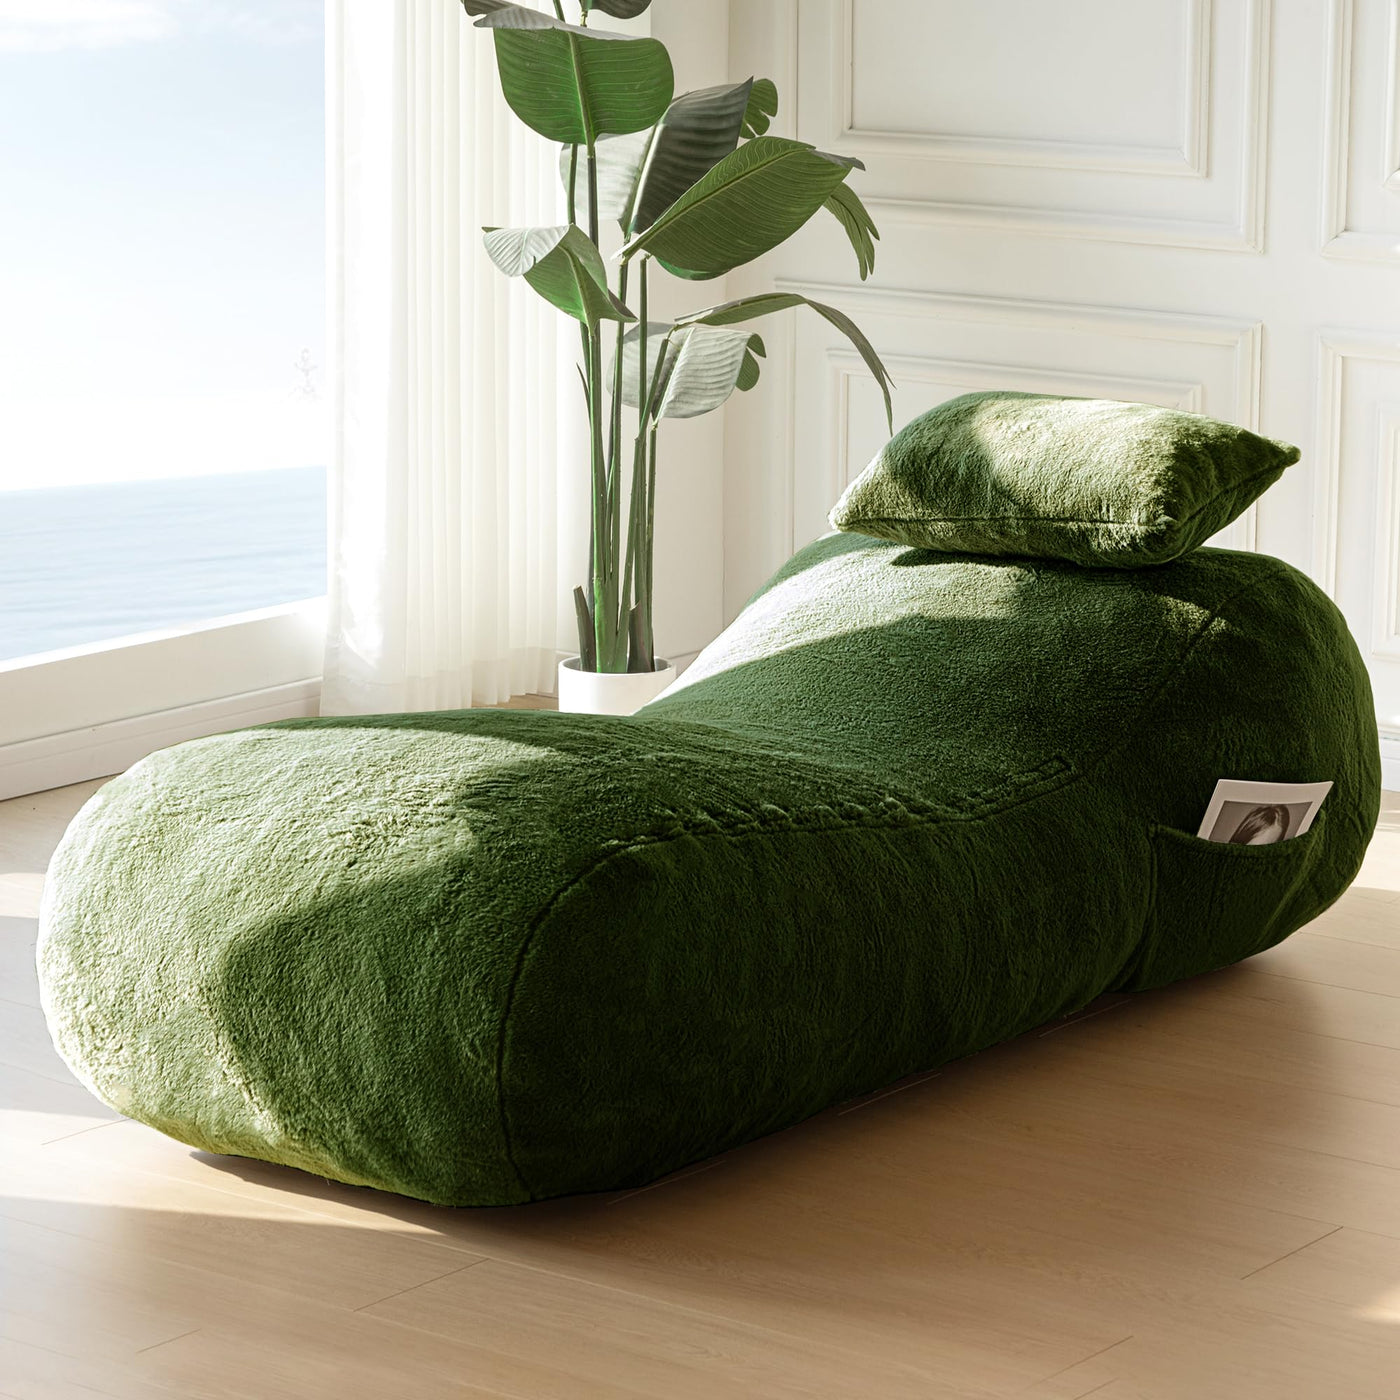 MAXYOYO Bean Bag Bed with Pillow, Chaise Lounge Chair Indoor, Green